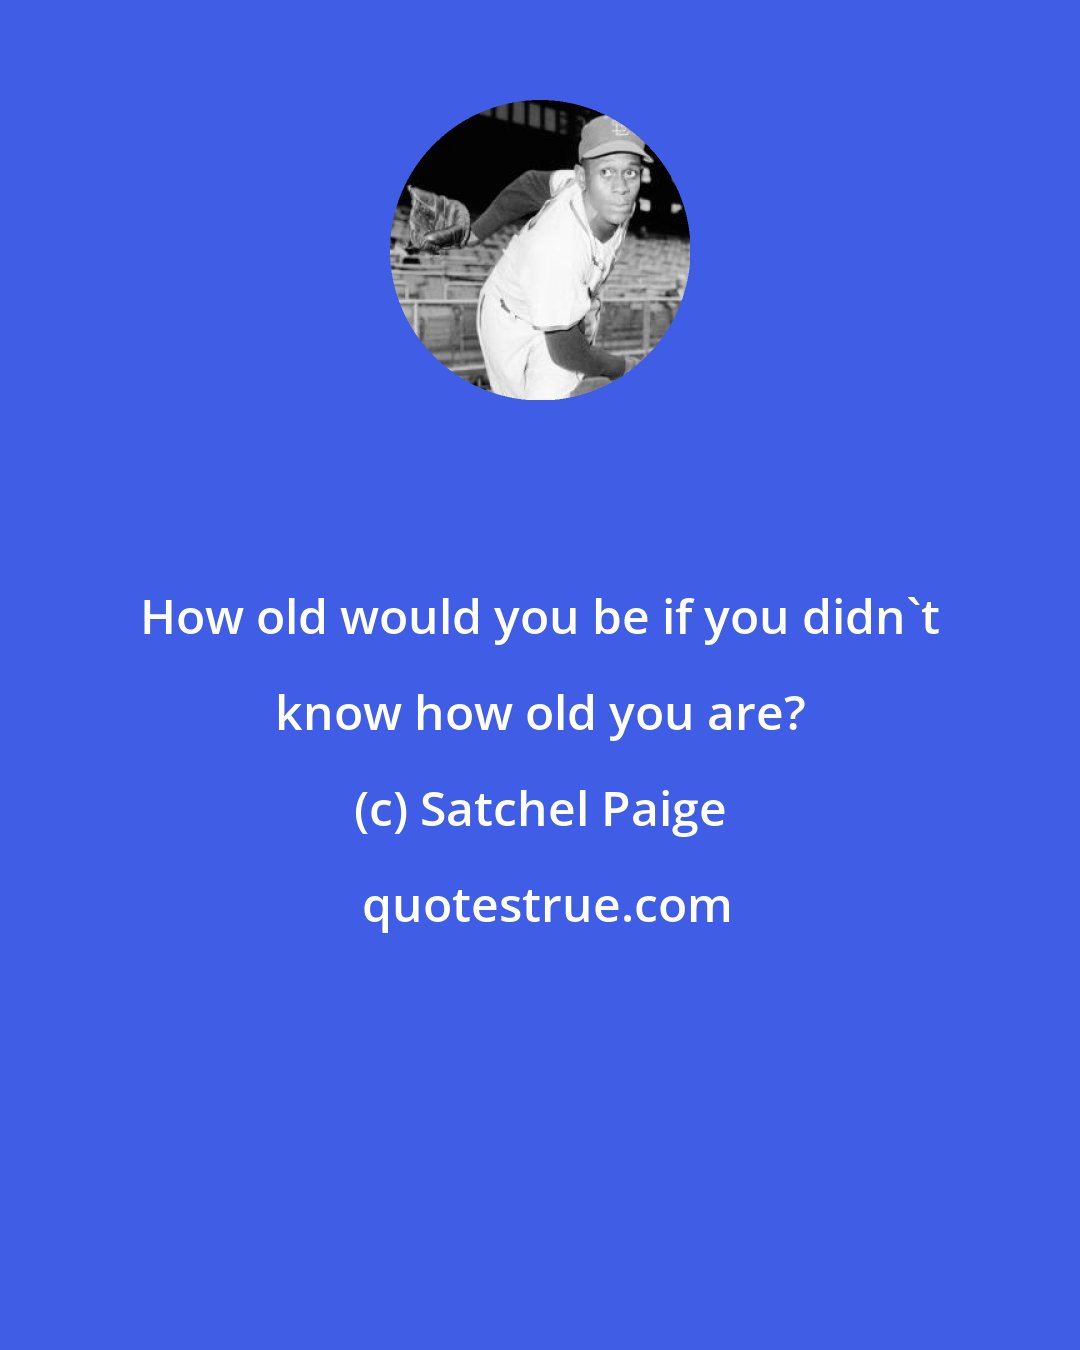 Satchel Paige: How old would you be if you didn't know how old you are?